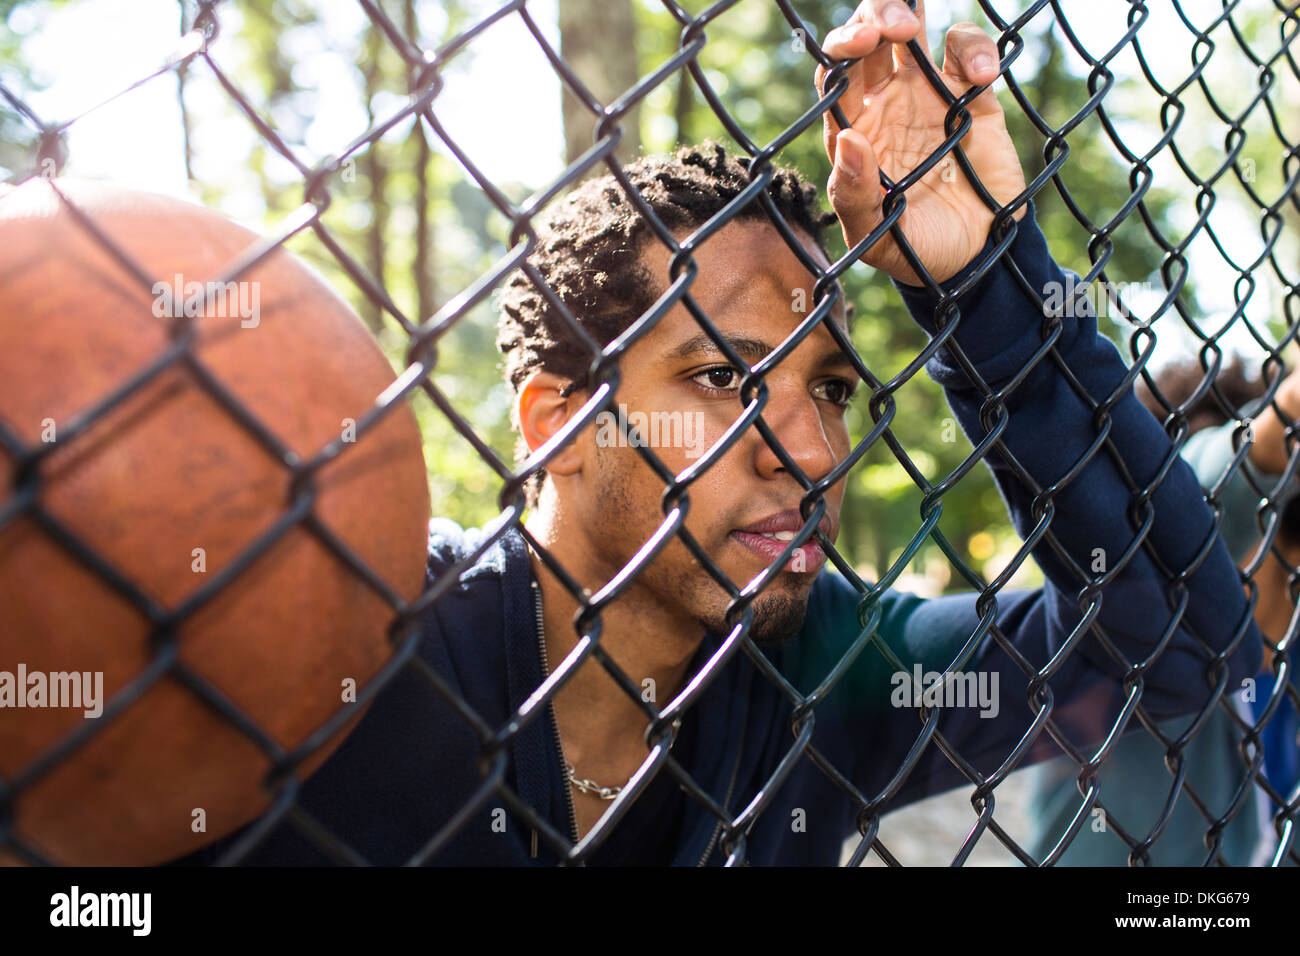 Portrait of young man holding basketball through wire fence Stock Photo